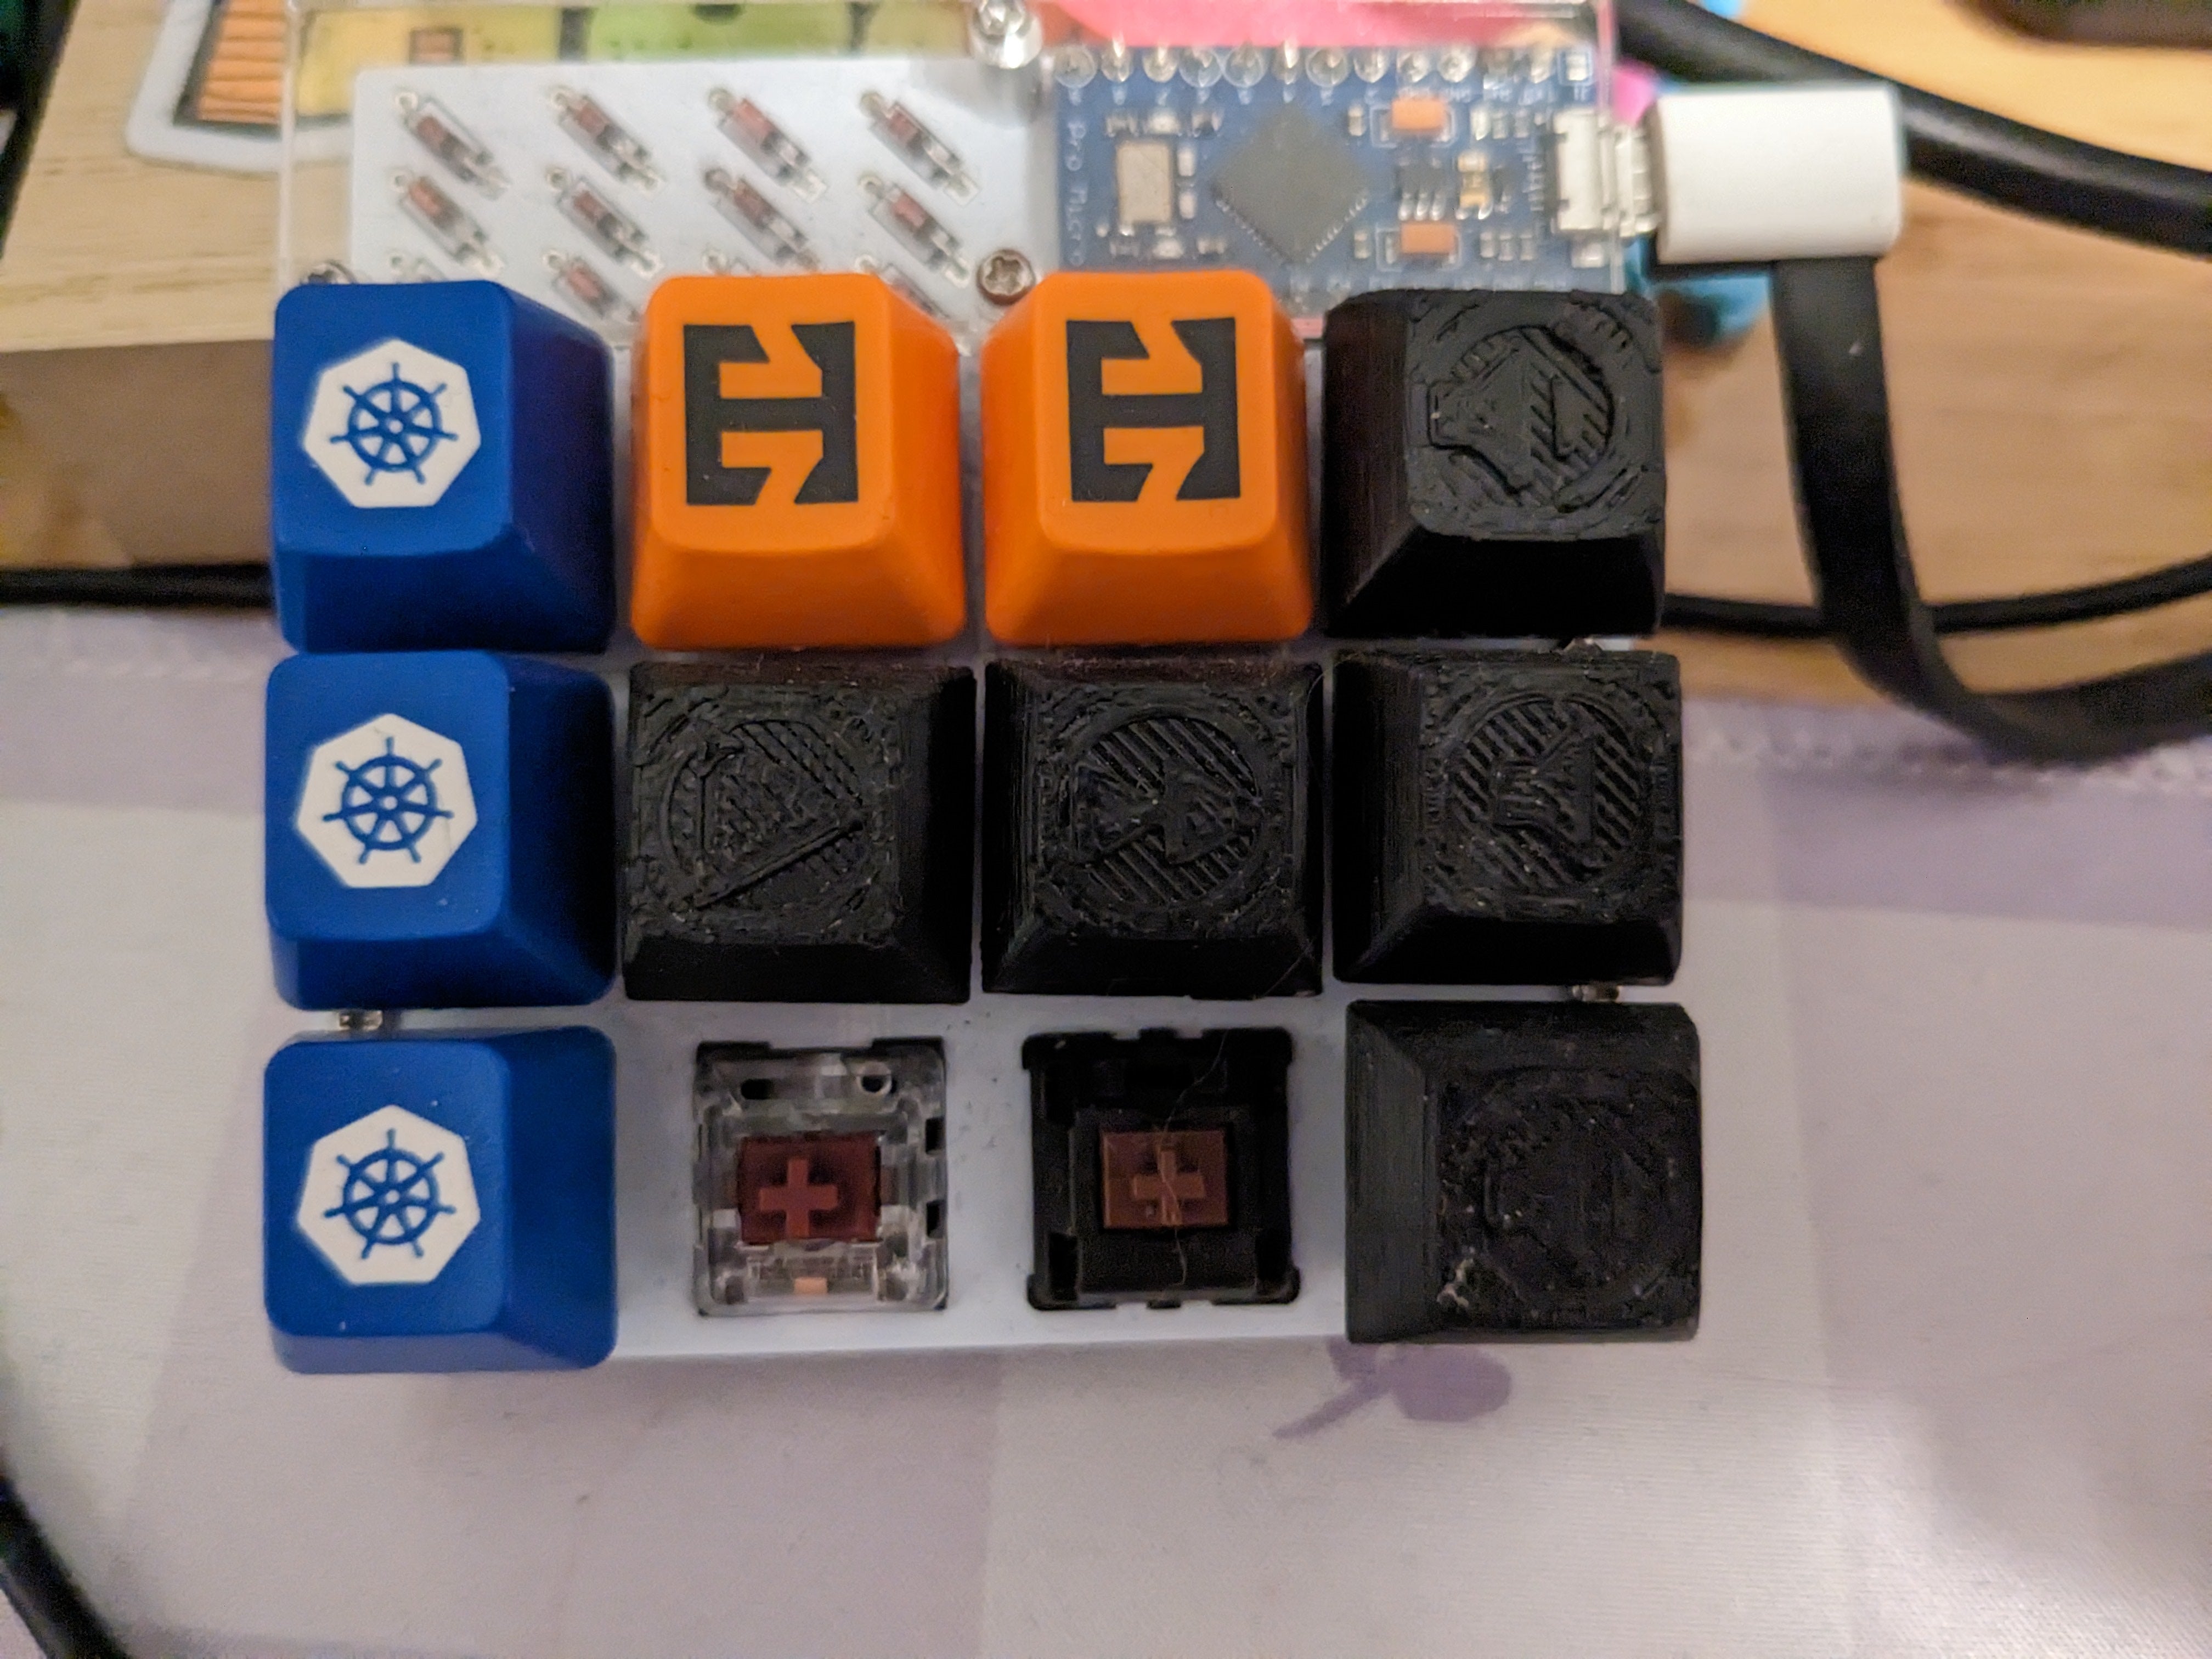 a small 3x4 keyboard. some of the keycaps have 3d-printed symbols like play, skip forward, volume up, and volume down.